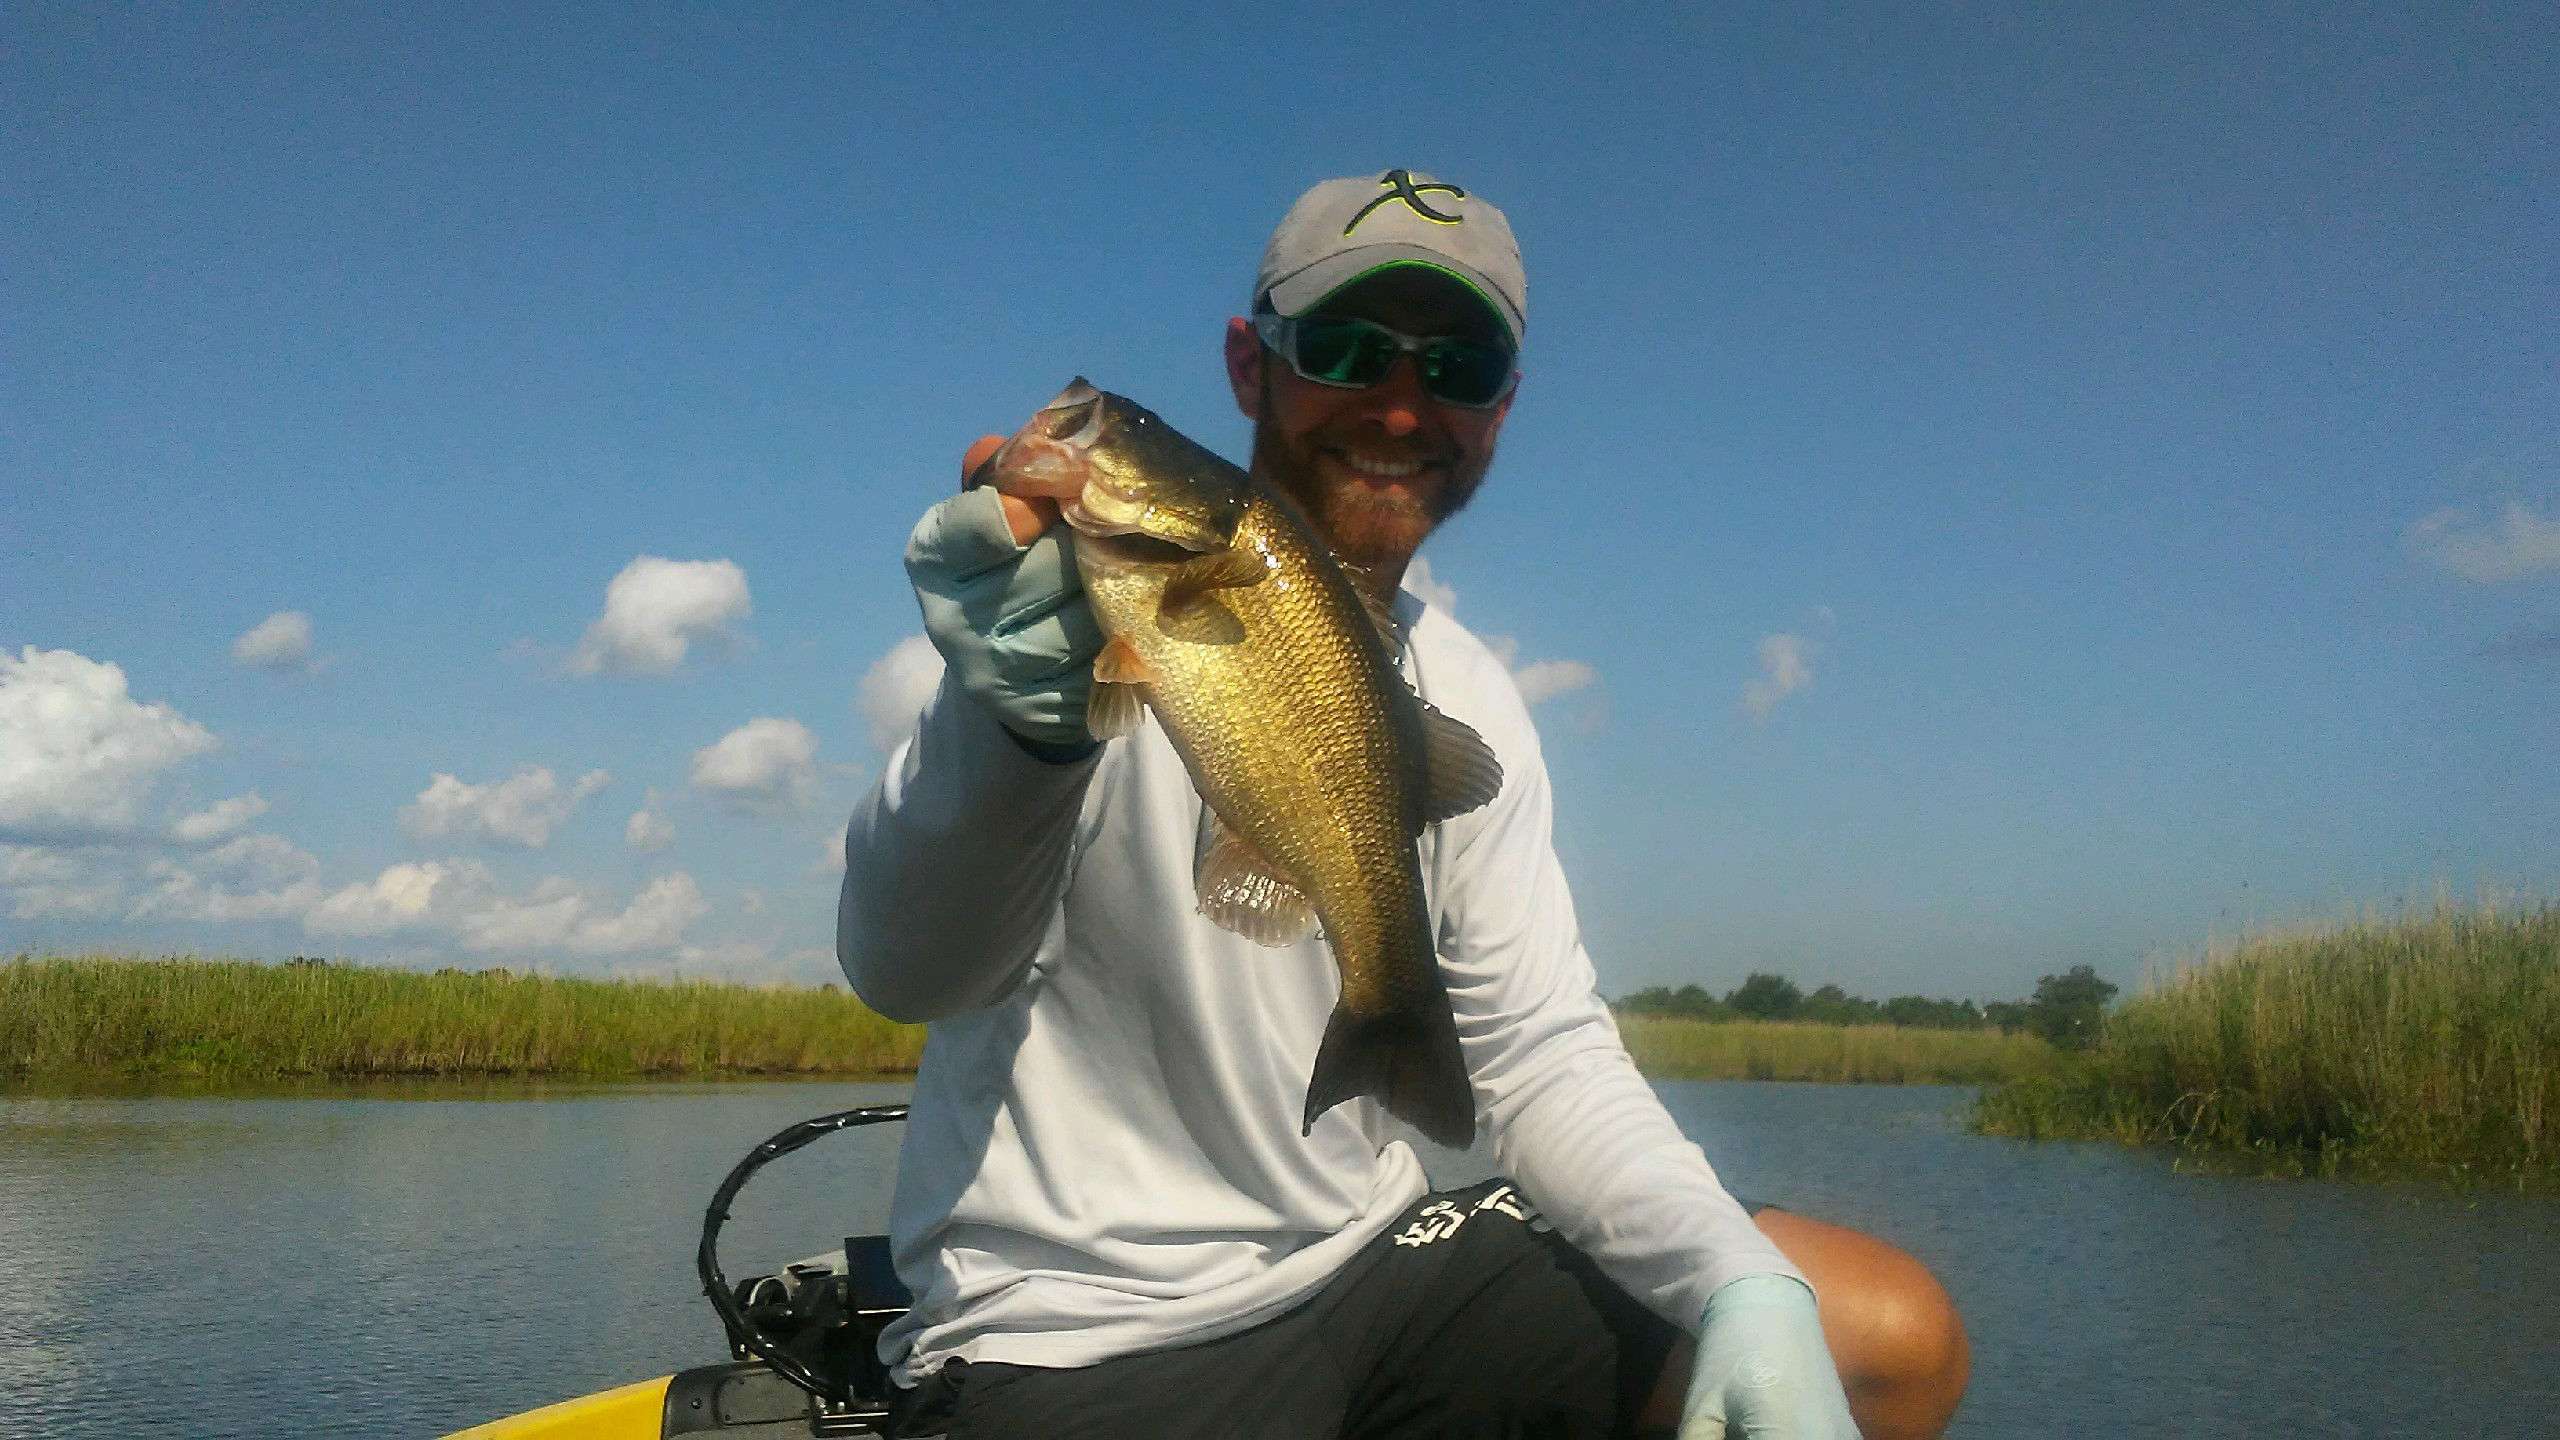 Brandon Lester on the board with a pretty Sabine baby! 